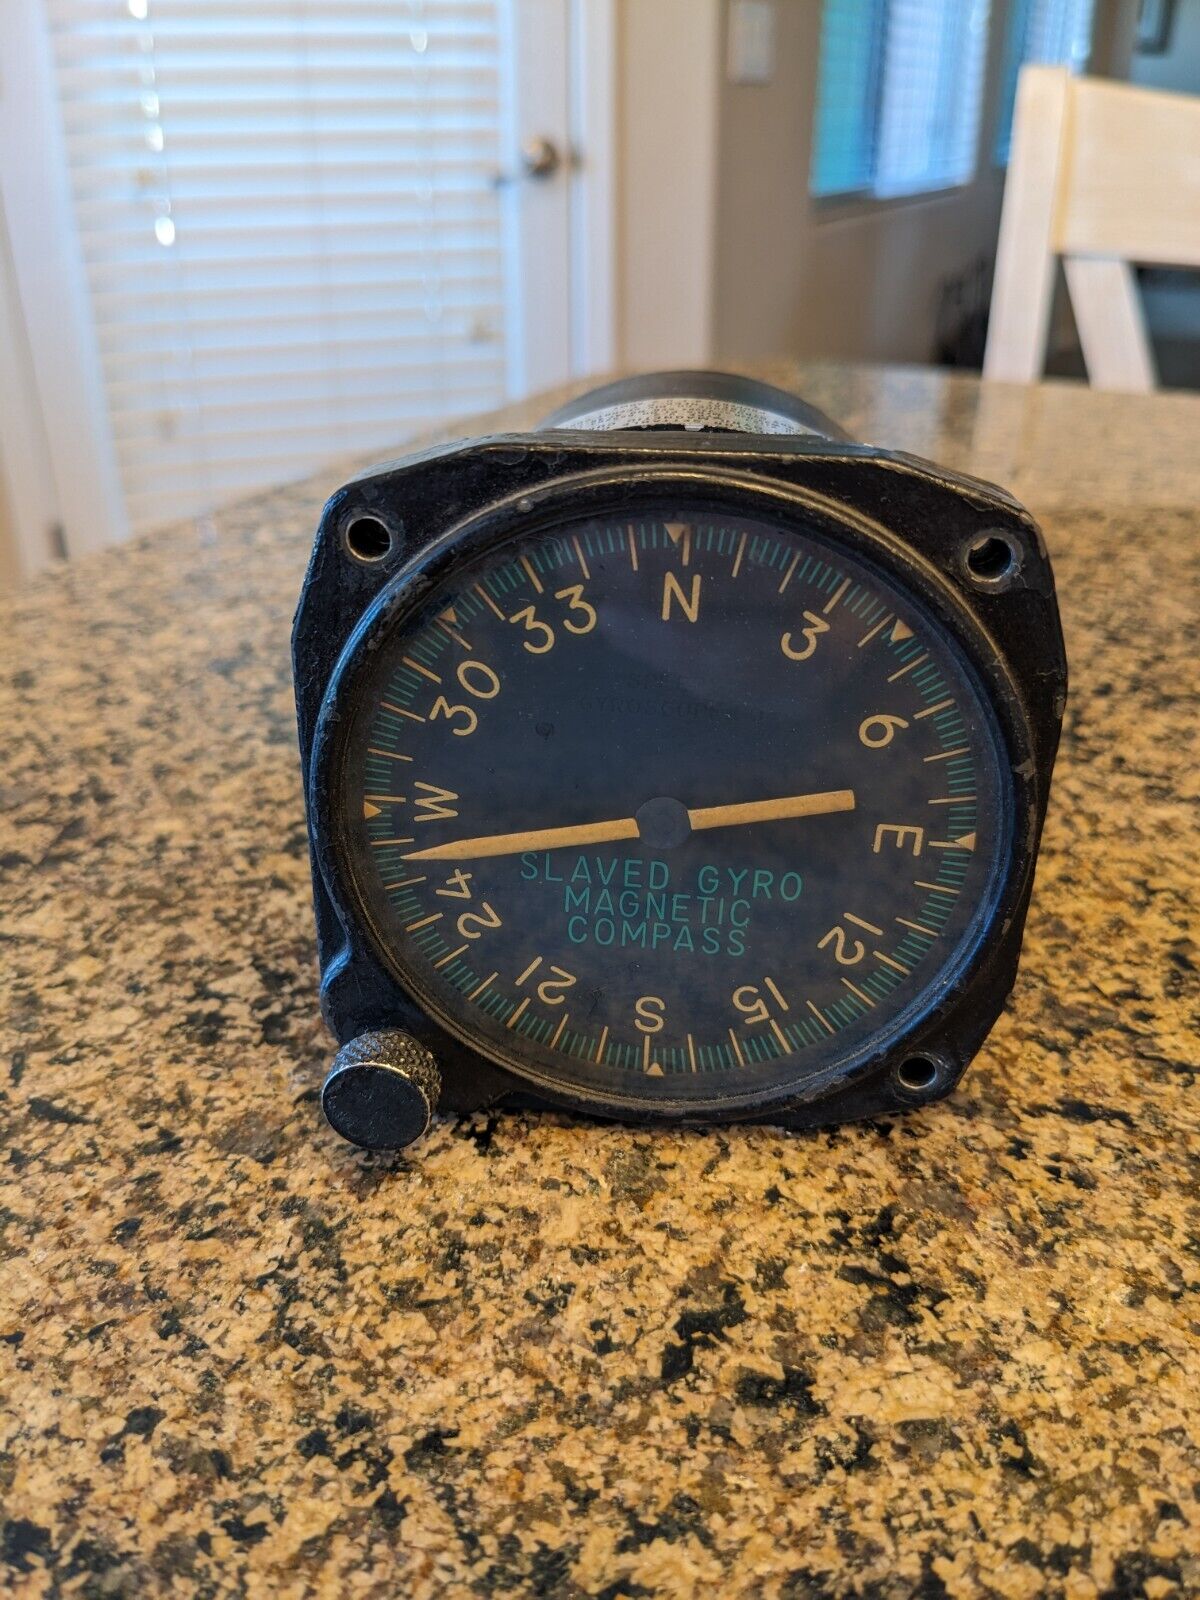 SPERRY INSTRUMENT SLAVED GYRO MAGNETIC COMPASS TYPE V-2 Pt No 665263-11 US ARMY